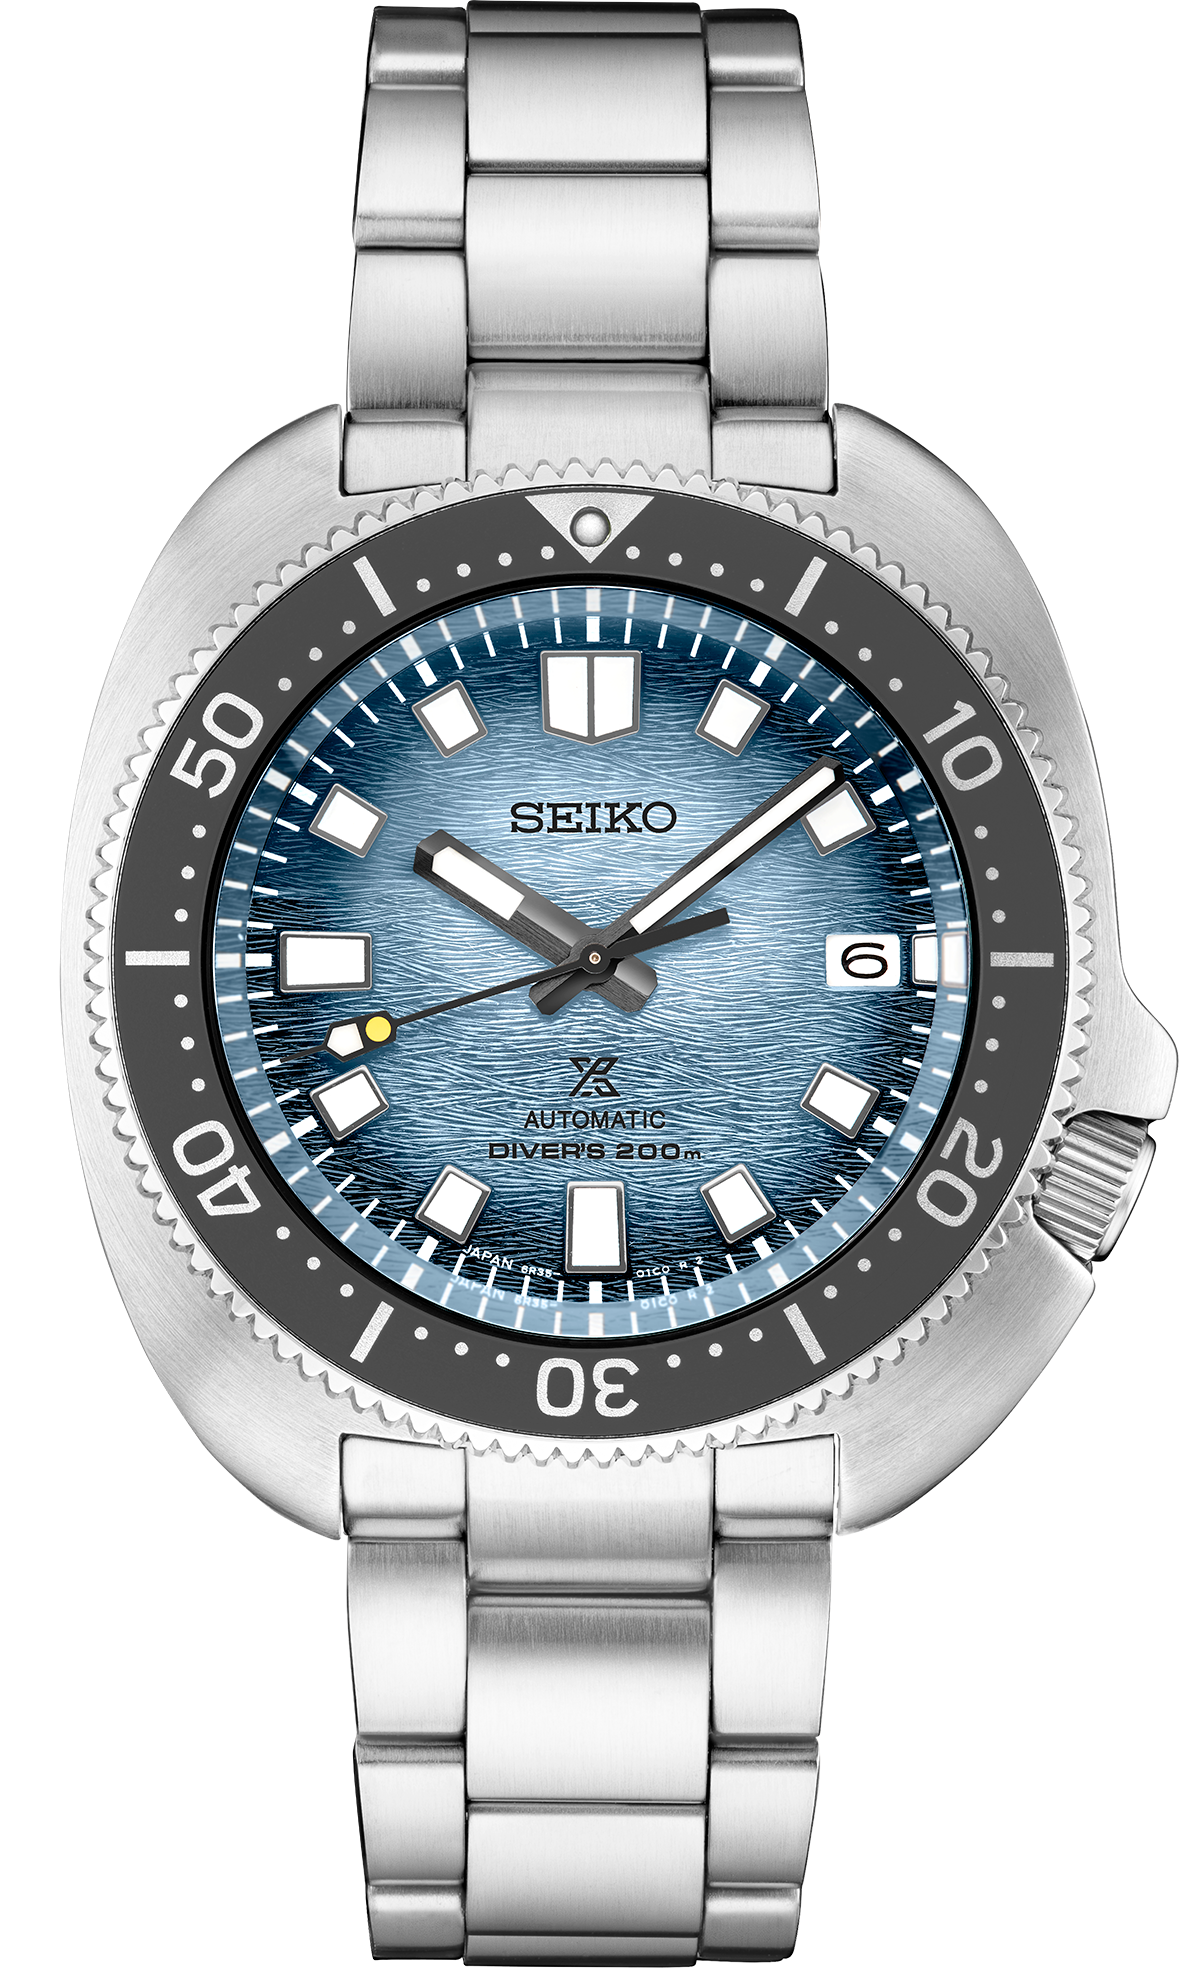 PROSPEX BUILT FOR THE ICE DIVER U.S. SPECIAL EDITION SPB263